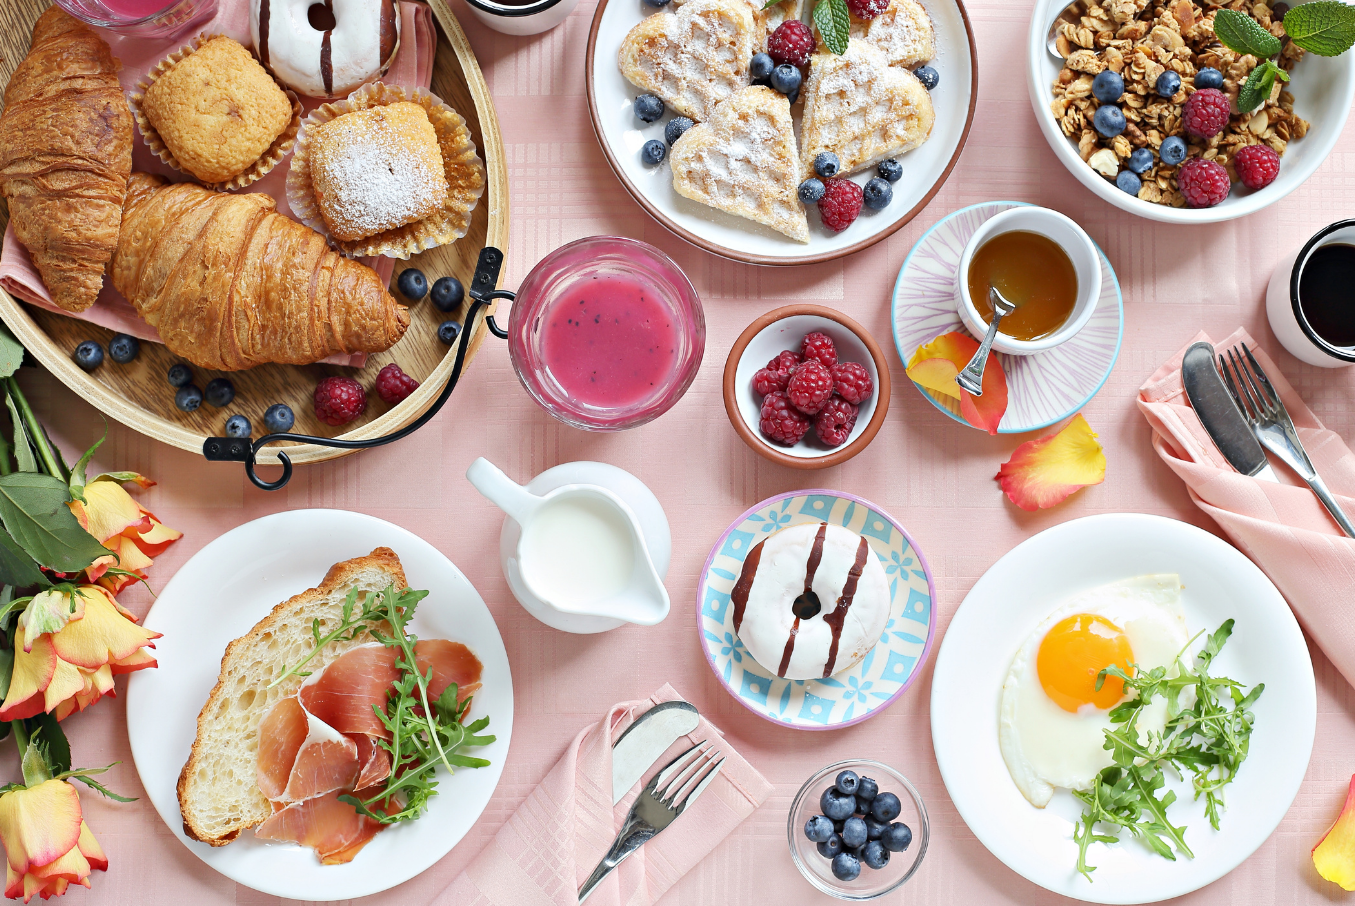 A brunch spread to promote a brunch happening at Le Meridien Houston Hotel in Texas.